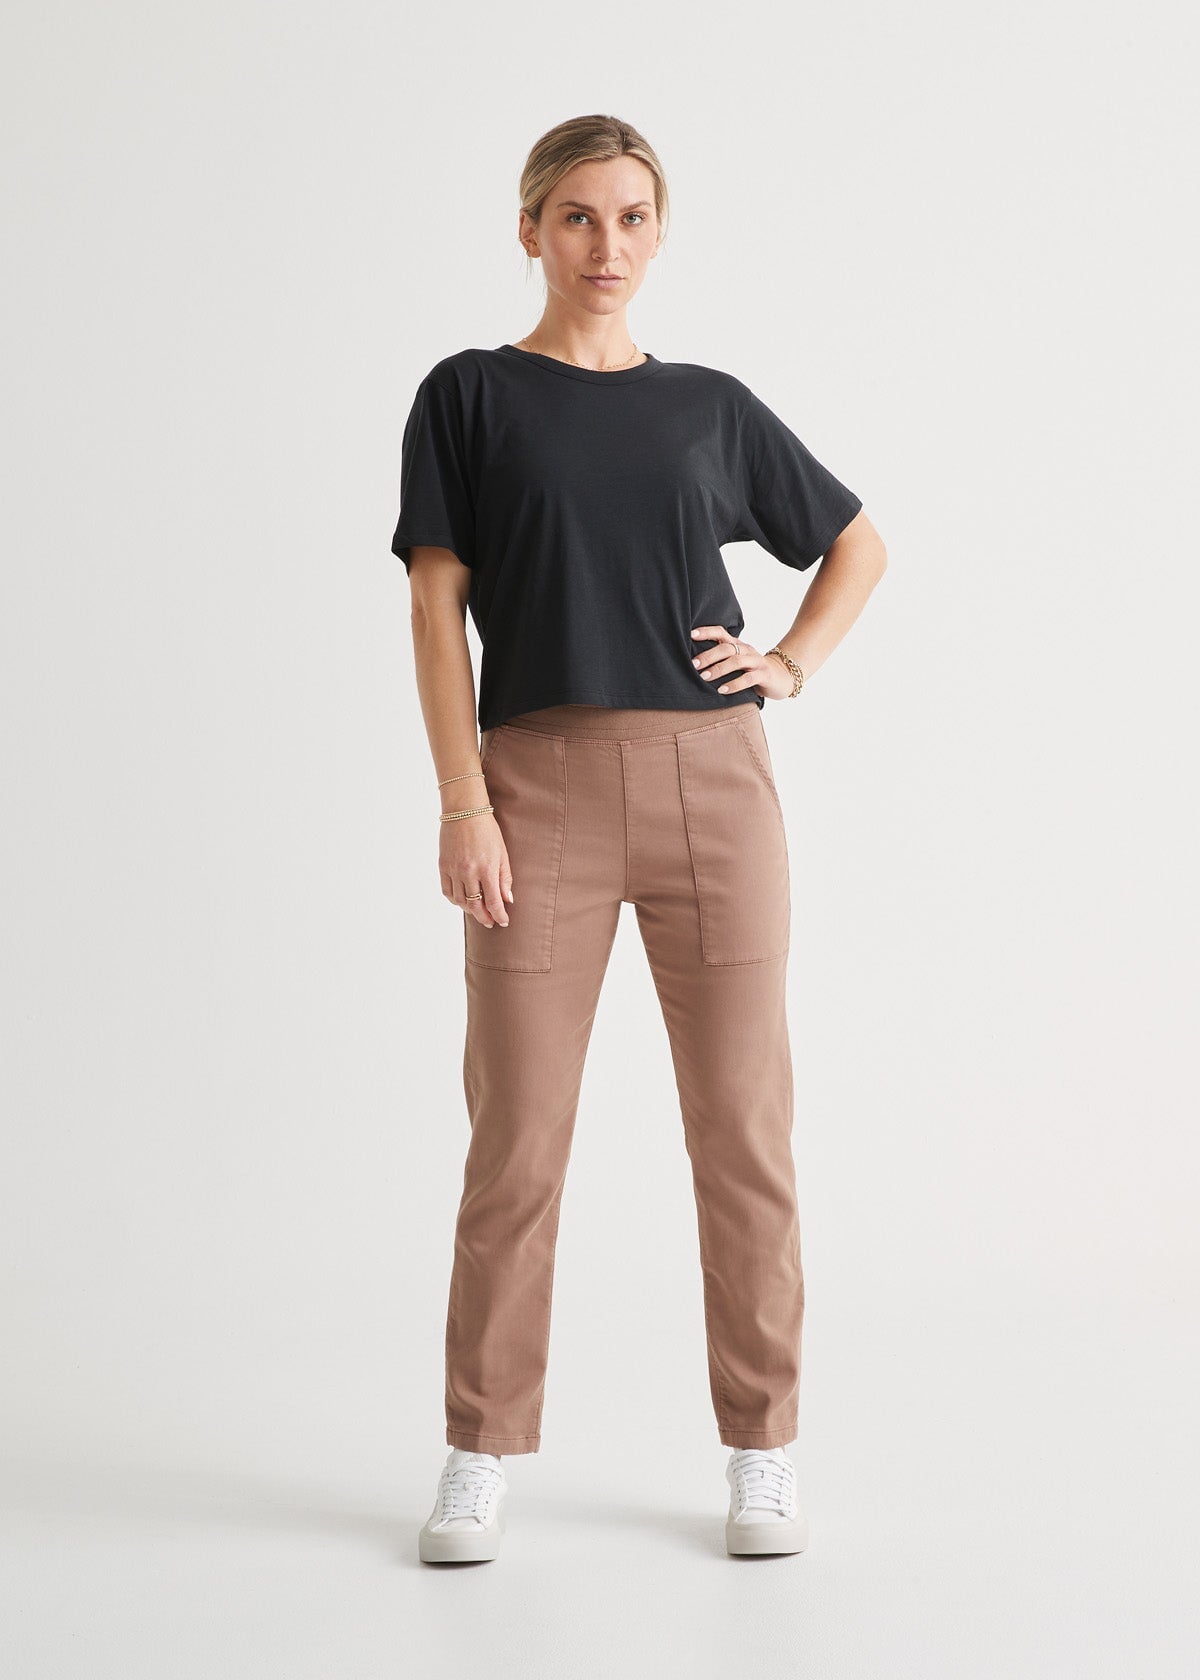 Women's High-Rise Woven Ankle Jogger Pants - A New Day™